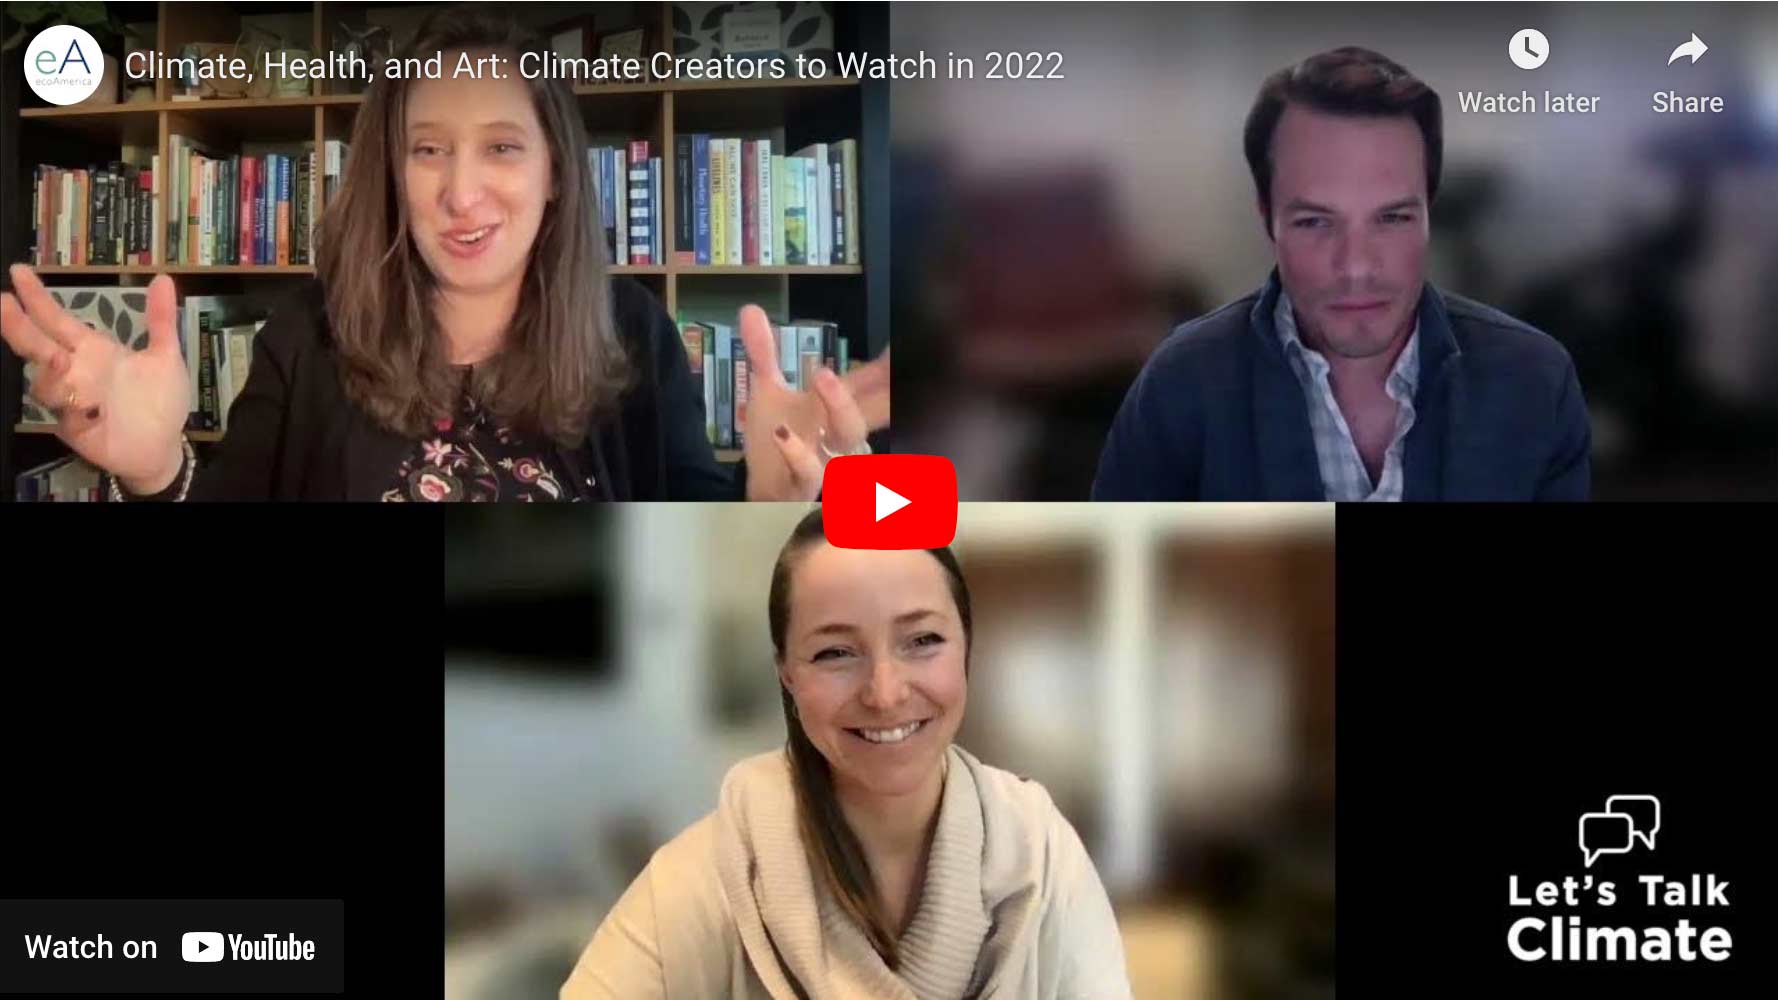 Climate, Health, and Art: Climate Creators to Watch in 2022